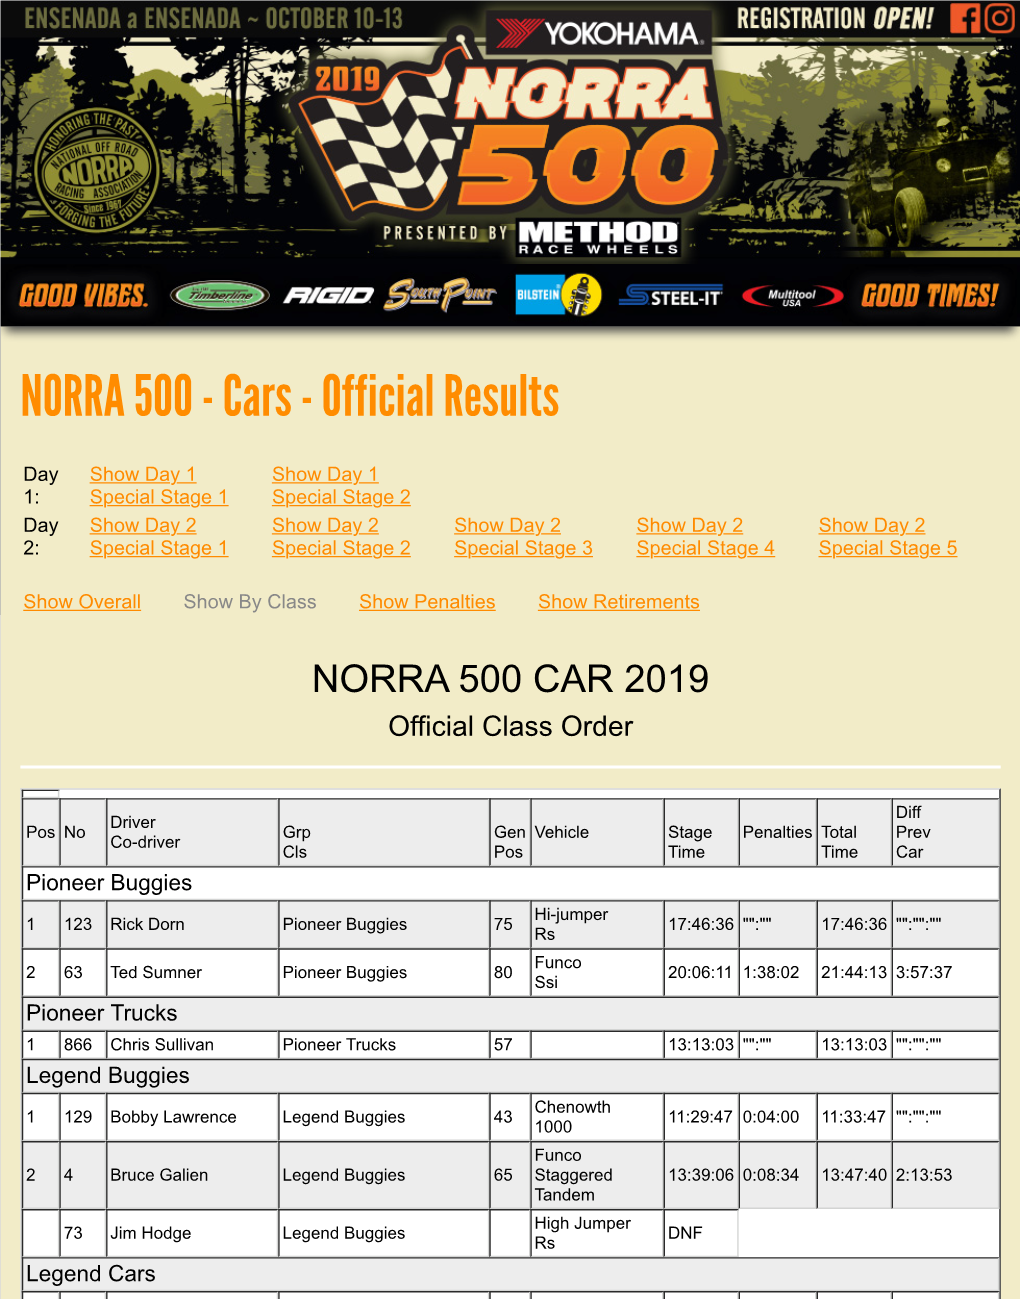 NORRA 500 - Cars - Official Results